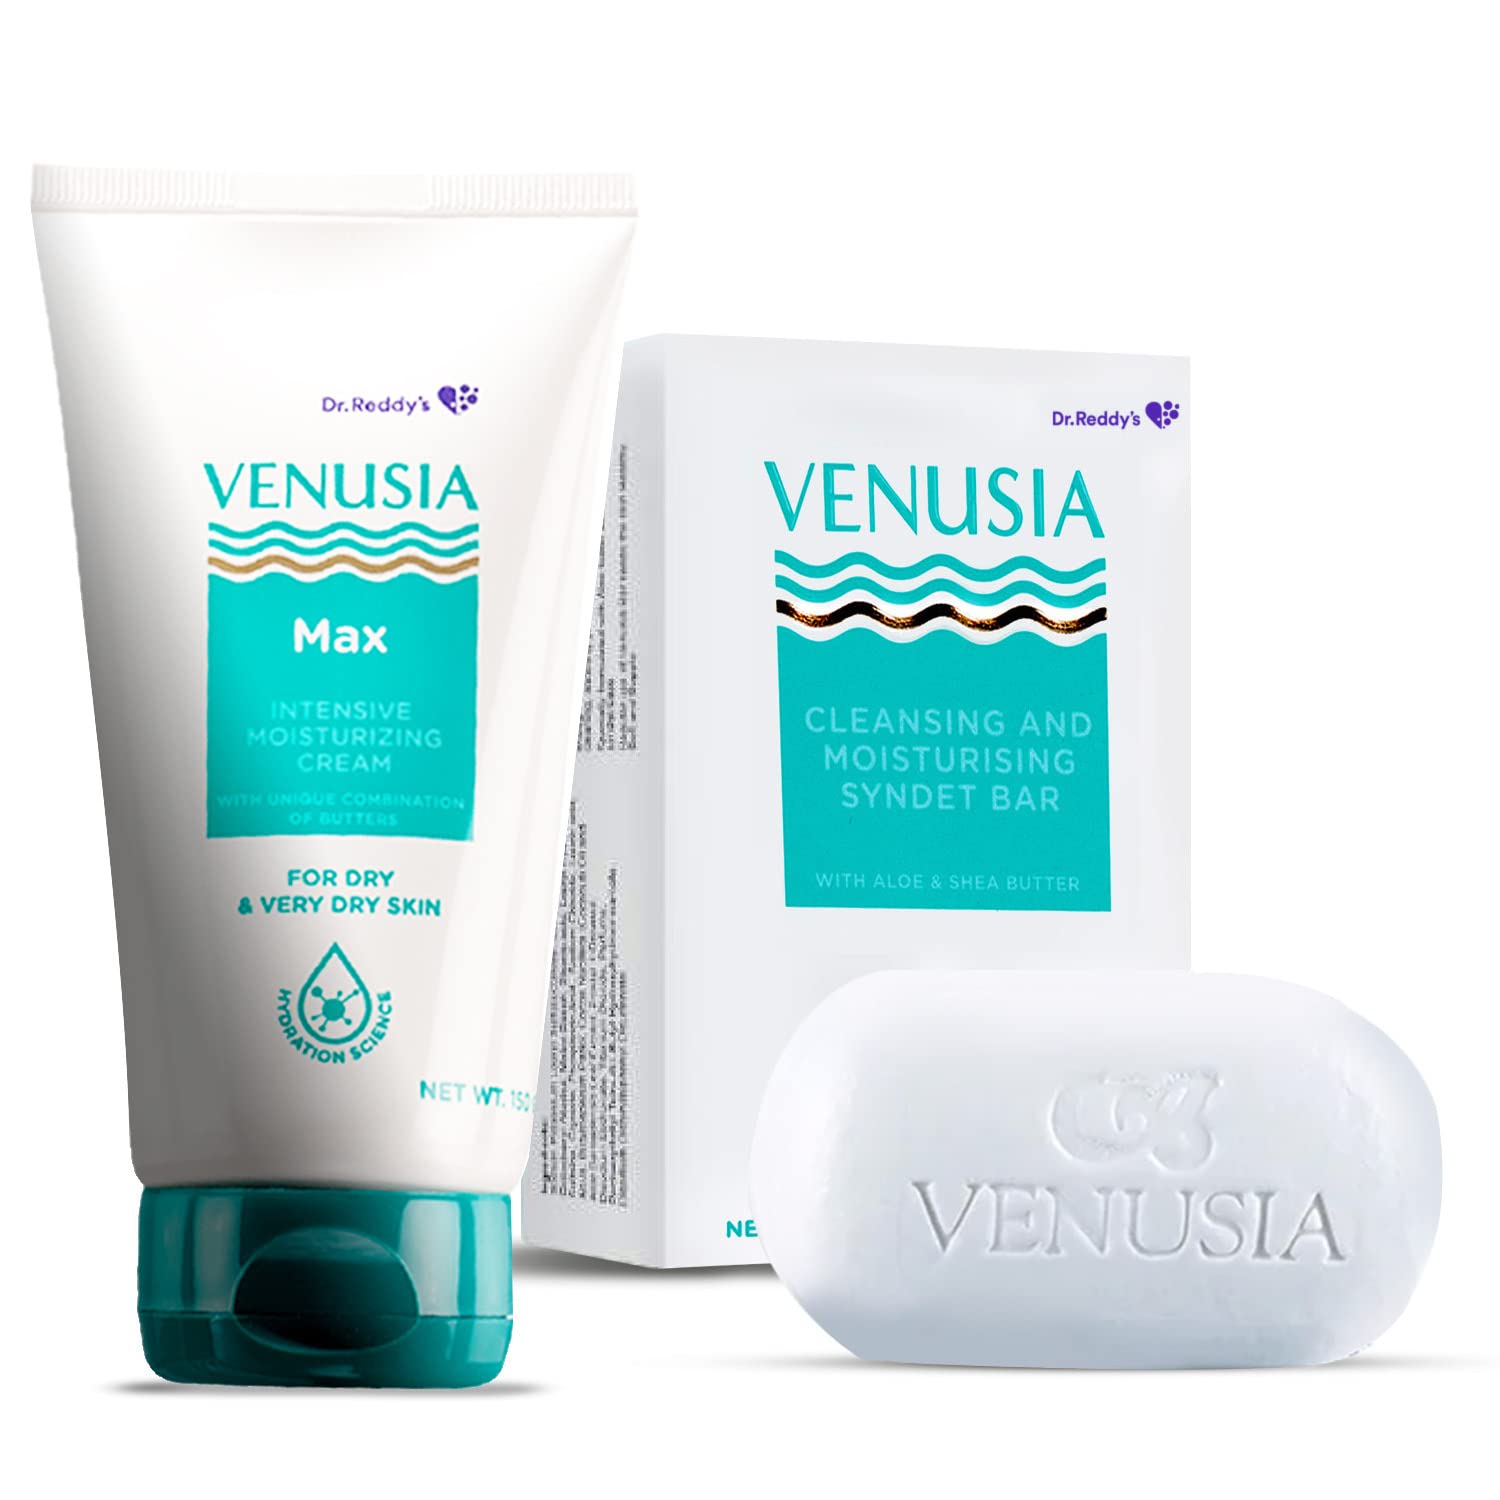 Dr. Reddy's Venusia Moisturizing Bathing Bar 75 gm and Venusia Max Cream Paraben Free 150 gm,For Dry Skin, For Everyday Use, Repairs Dry Skin, Soft and Smooth Skin, Moisturized and Hydrated Skin (Combo)